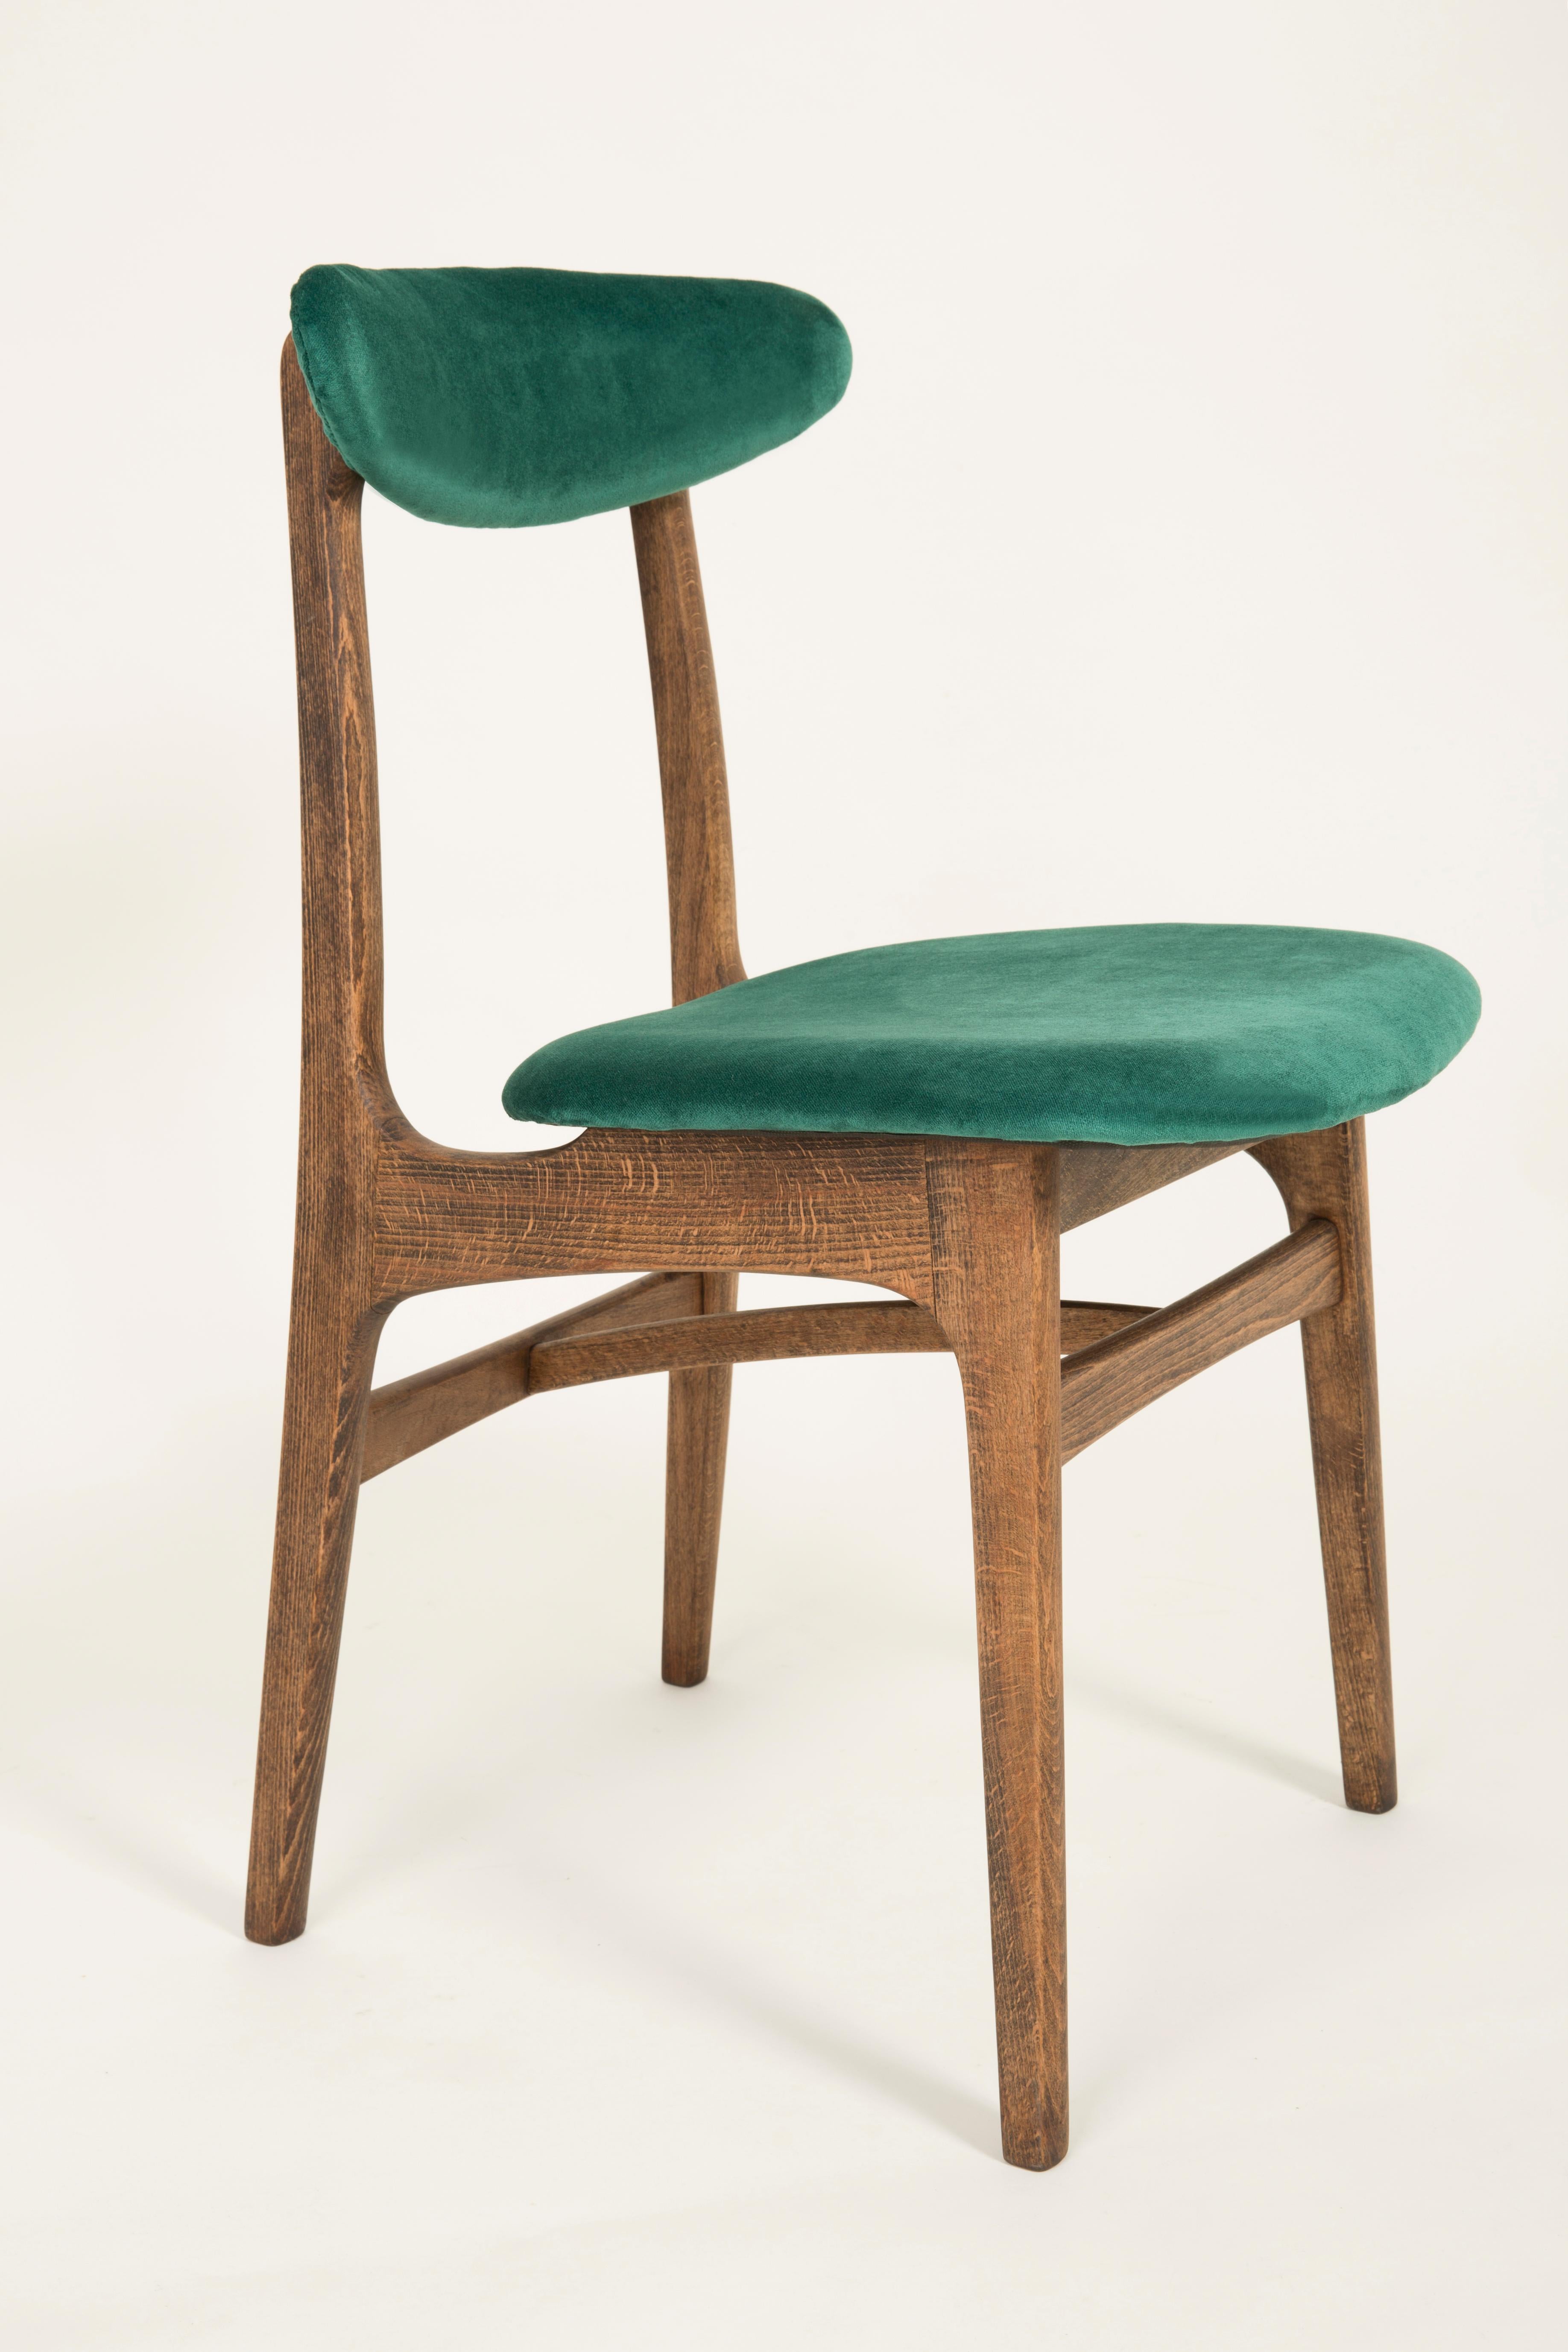 Chairs designed by prof. Rajmund Halas. They have been made of beechwood. They have undergone a complete upholstery renovation, the woodwork has been refreshed. Seats and backs were dressed in a dark green, durable and pleasant to the touch velvet